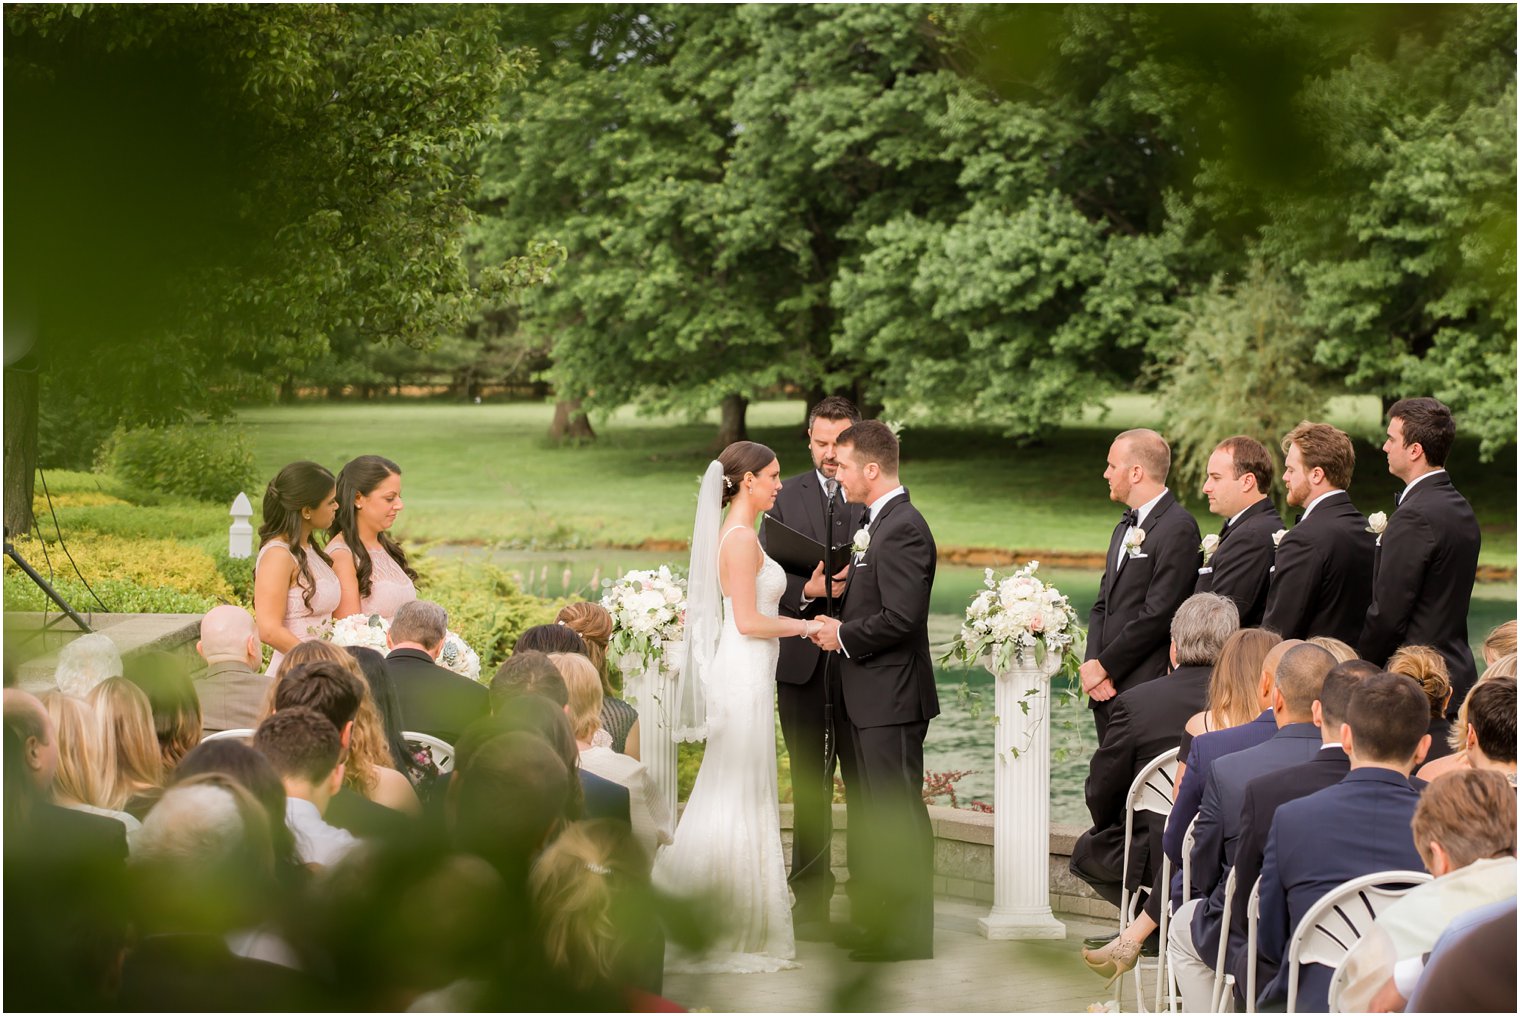 Garden ceremony at Windows on the Water at Frogbridge | Photos by Idalia Photography